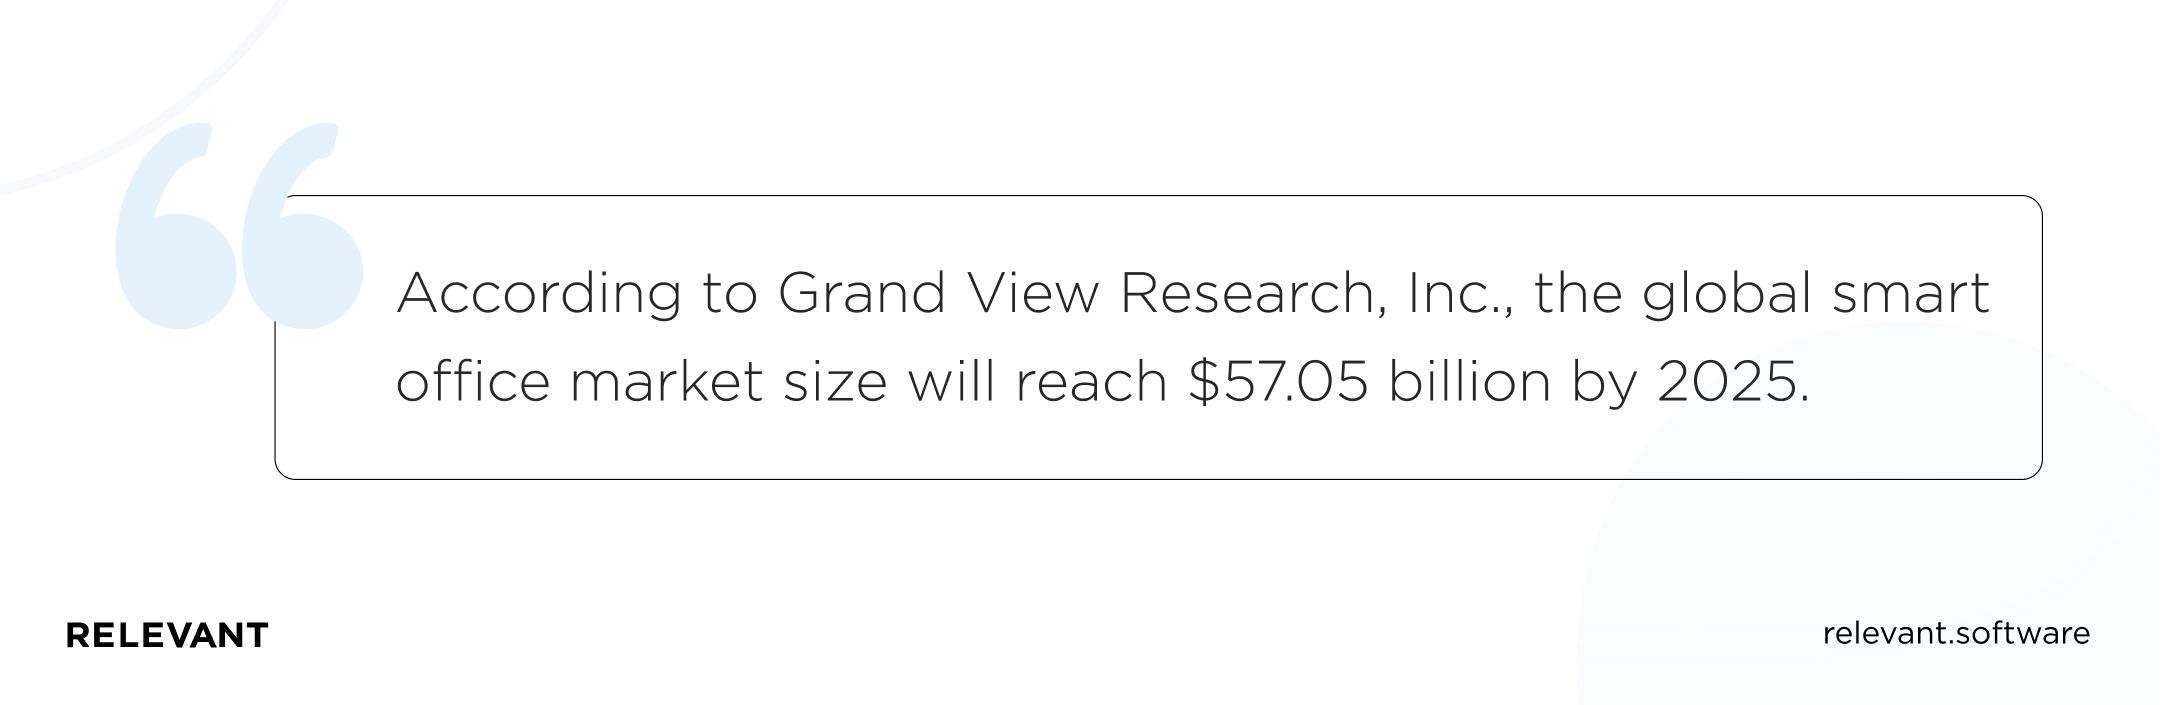 According to Grand View Research, Inc., the global smart office market size will reach .05 billion by 2025.